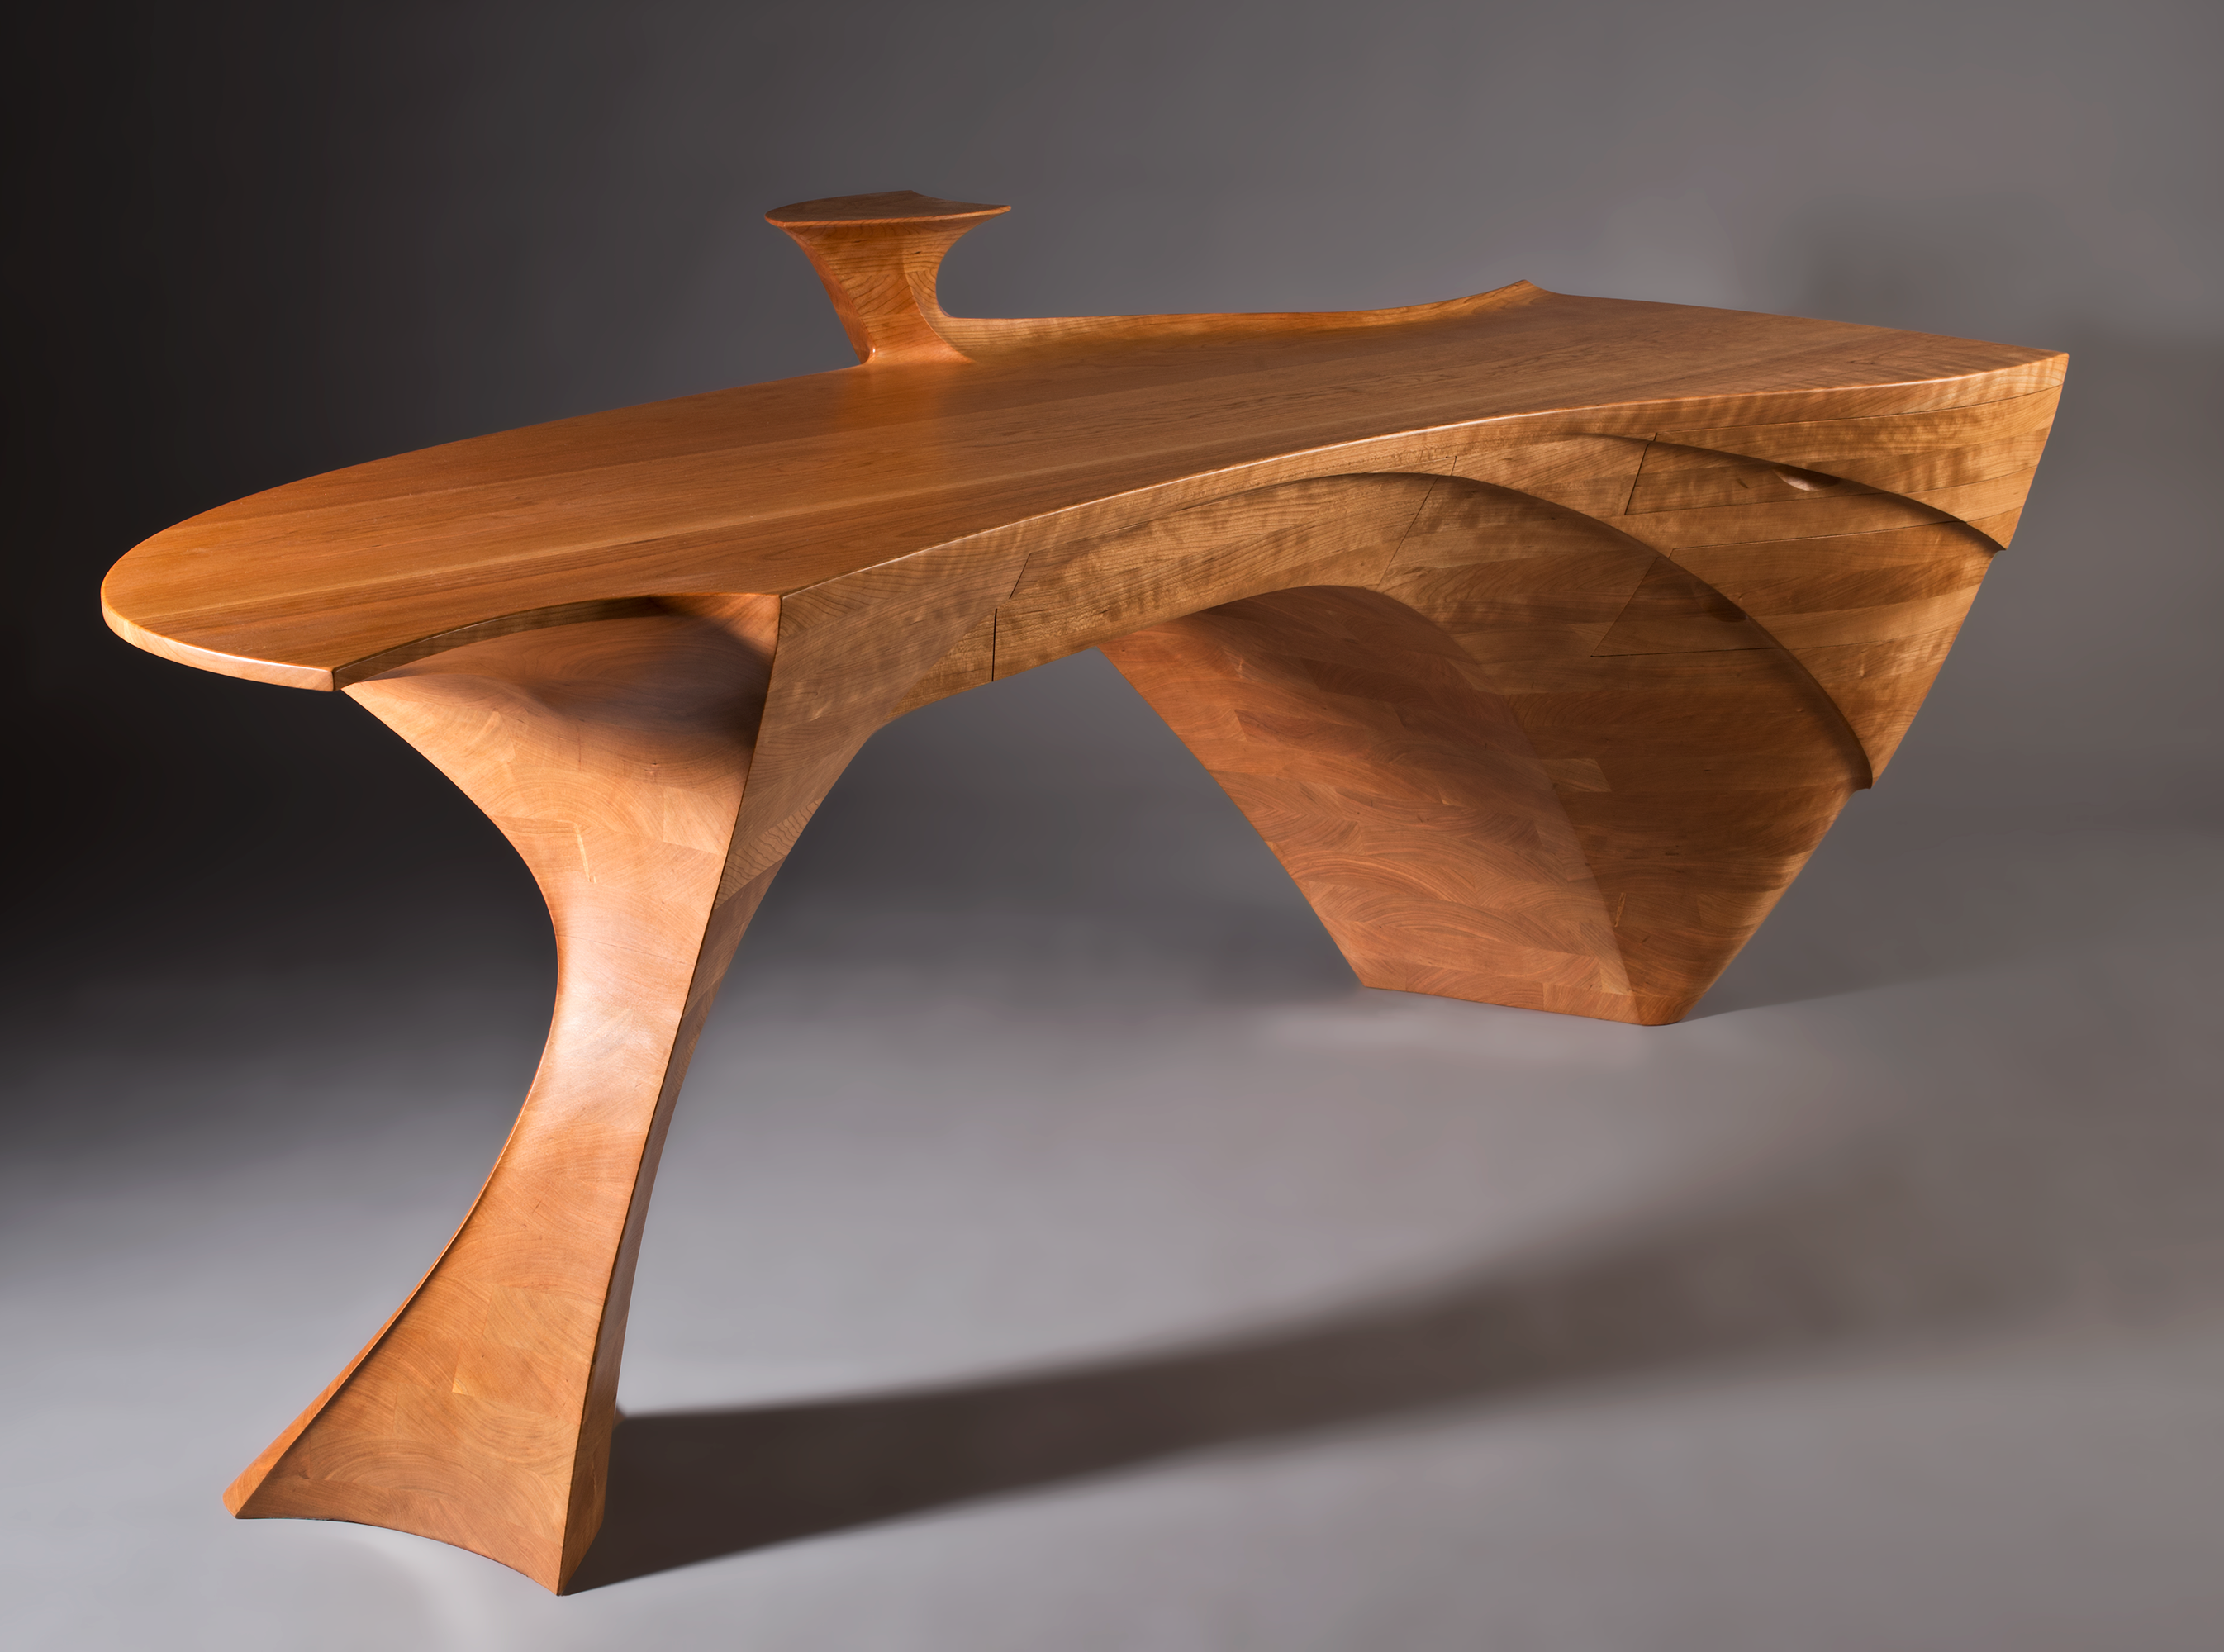 Wave Desk, 2019, sustainably harvested cherry, 36 x 80 x 32 in. Photo by Myron Gauger.